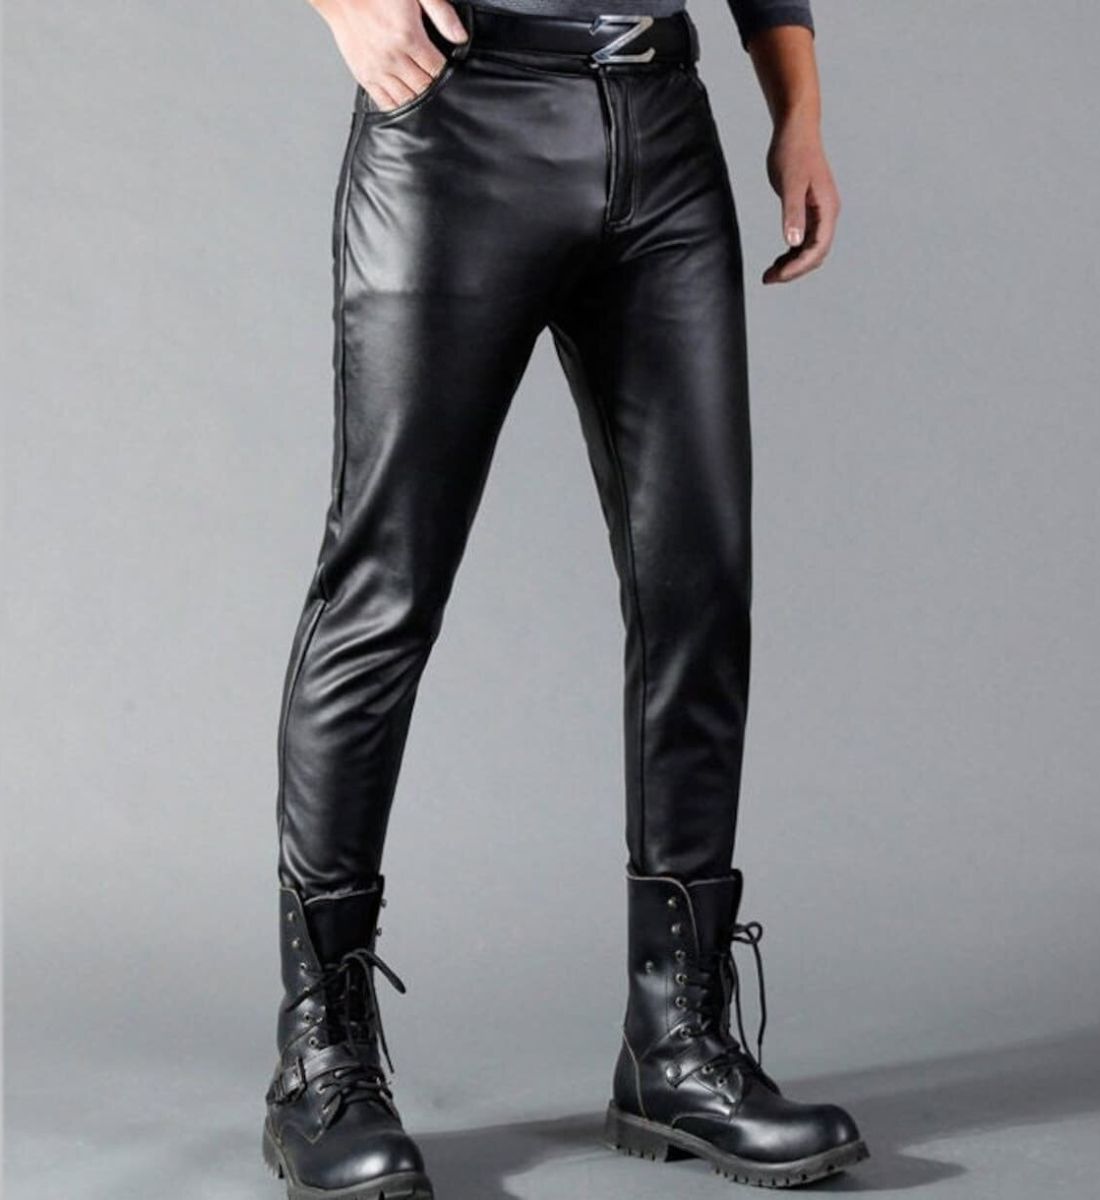 Men's Skinny Fit Leather Pants Stylish PU Leather Trousers Side